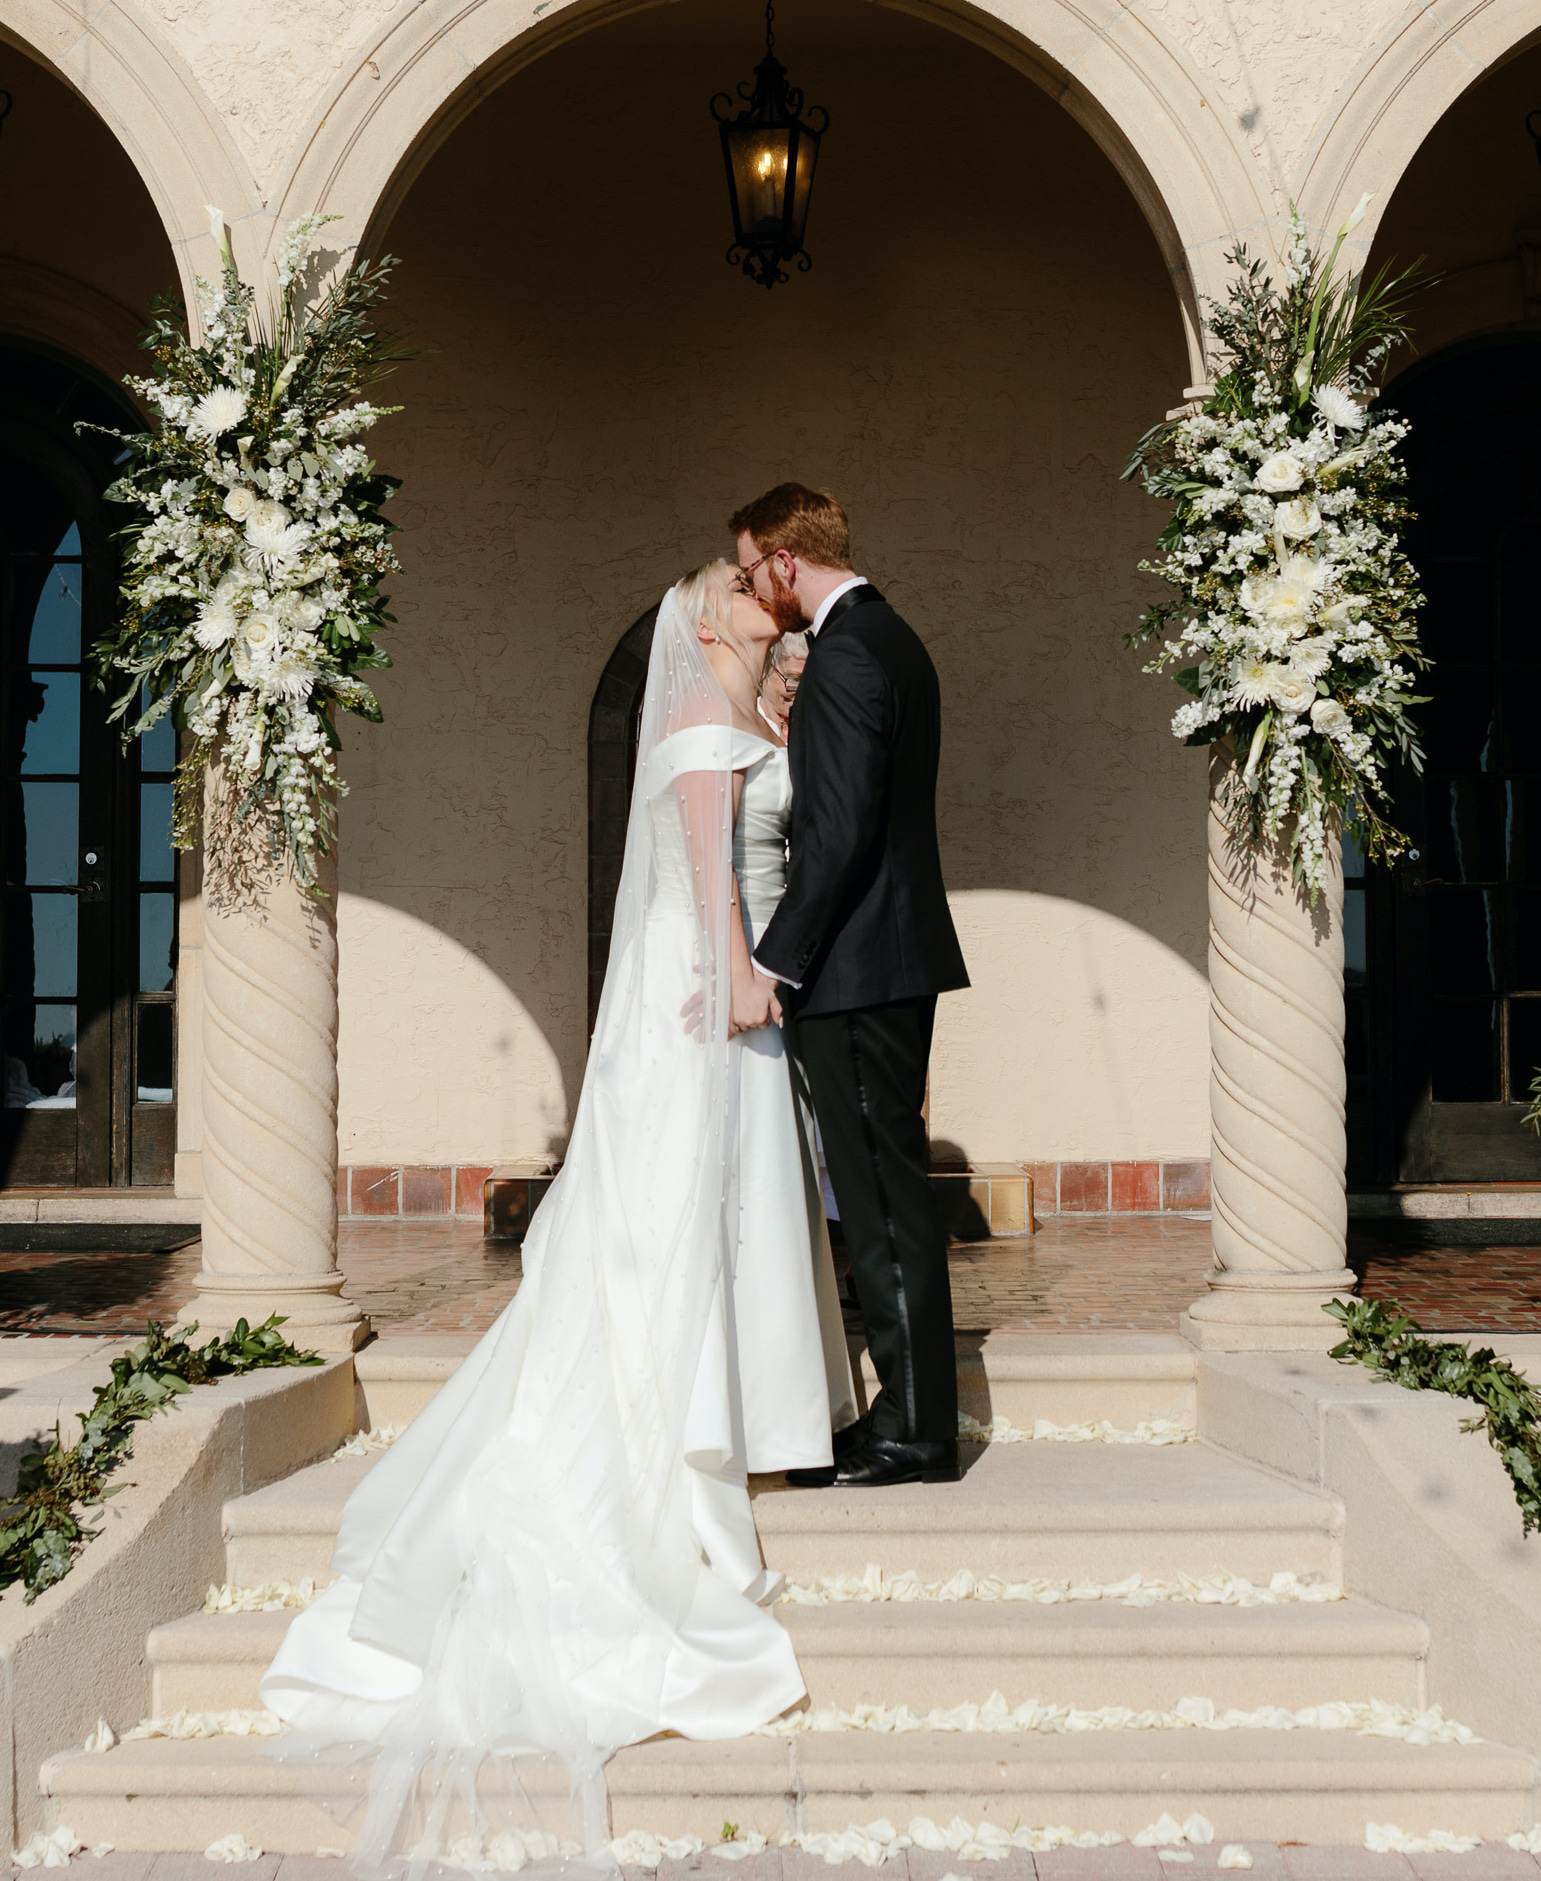 A bride and groom kiss at the altar during their alfresco ceremony in Sarasota, FL.